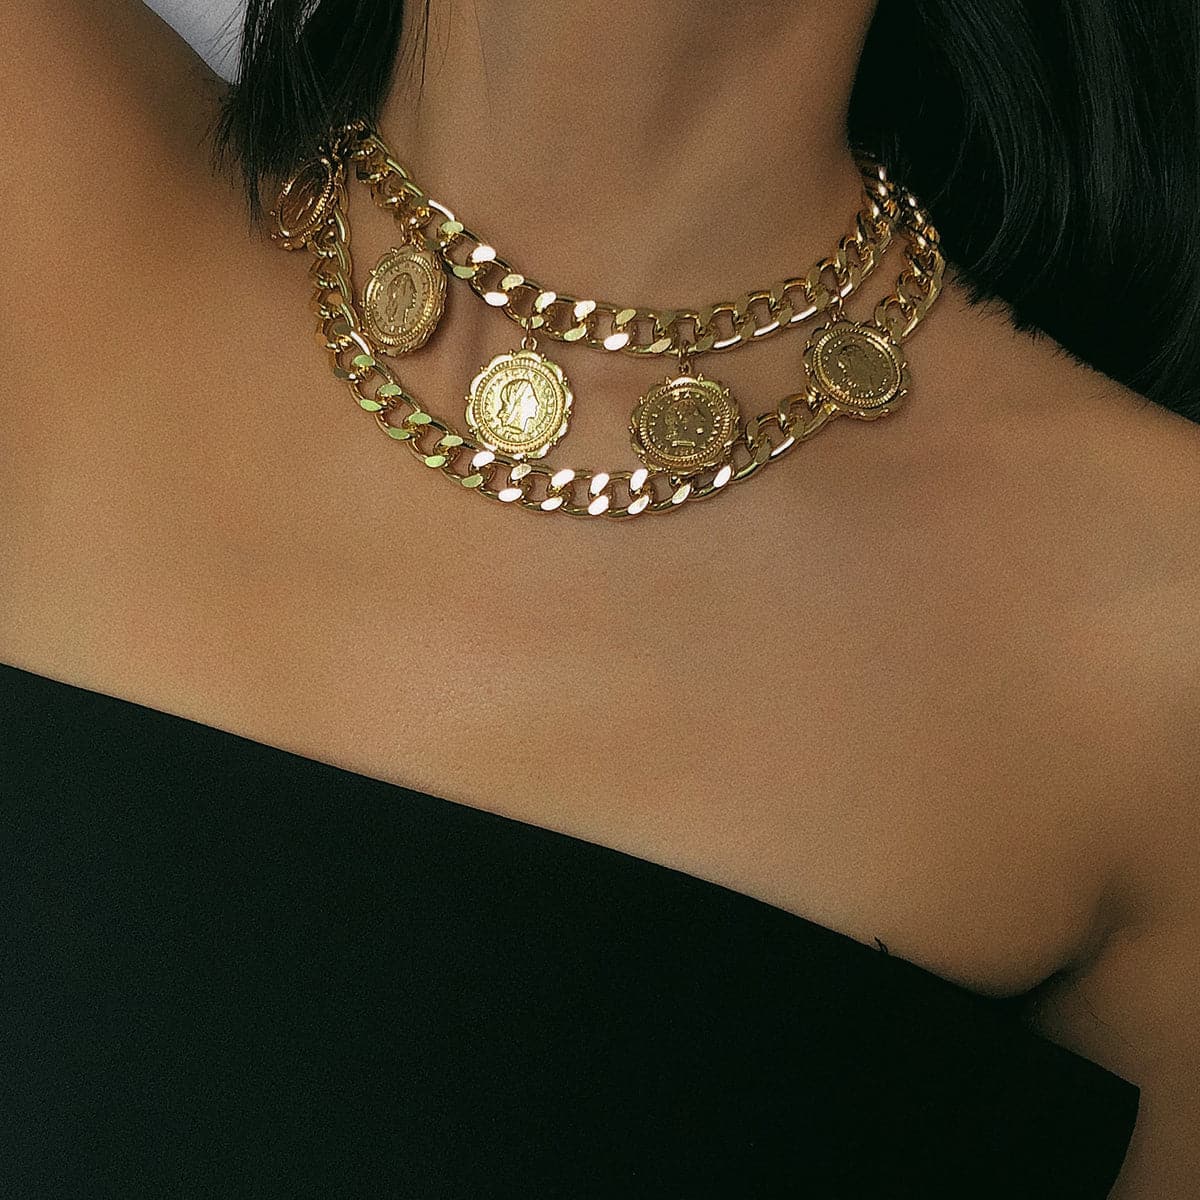 18K Gold-Plated Coin Station Layered Statement Necklace